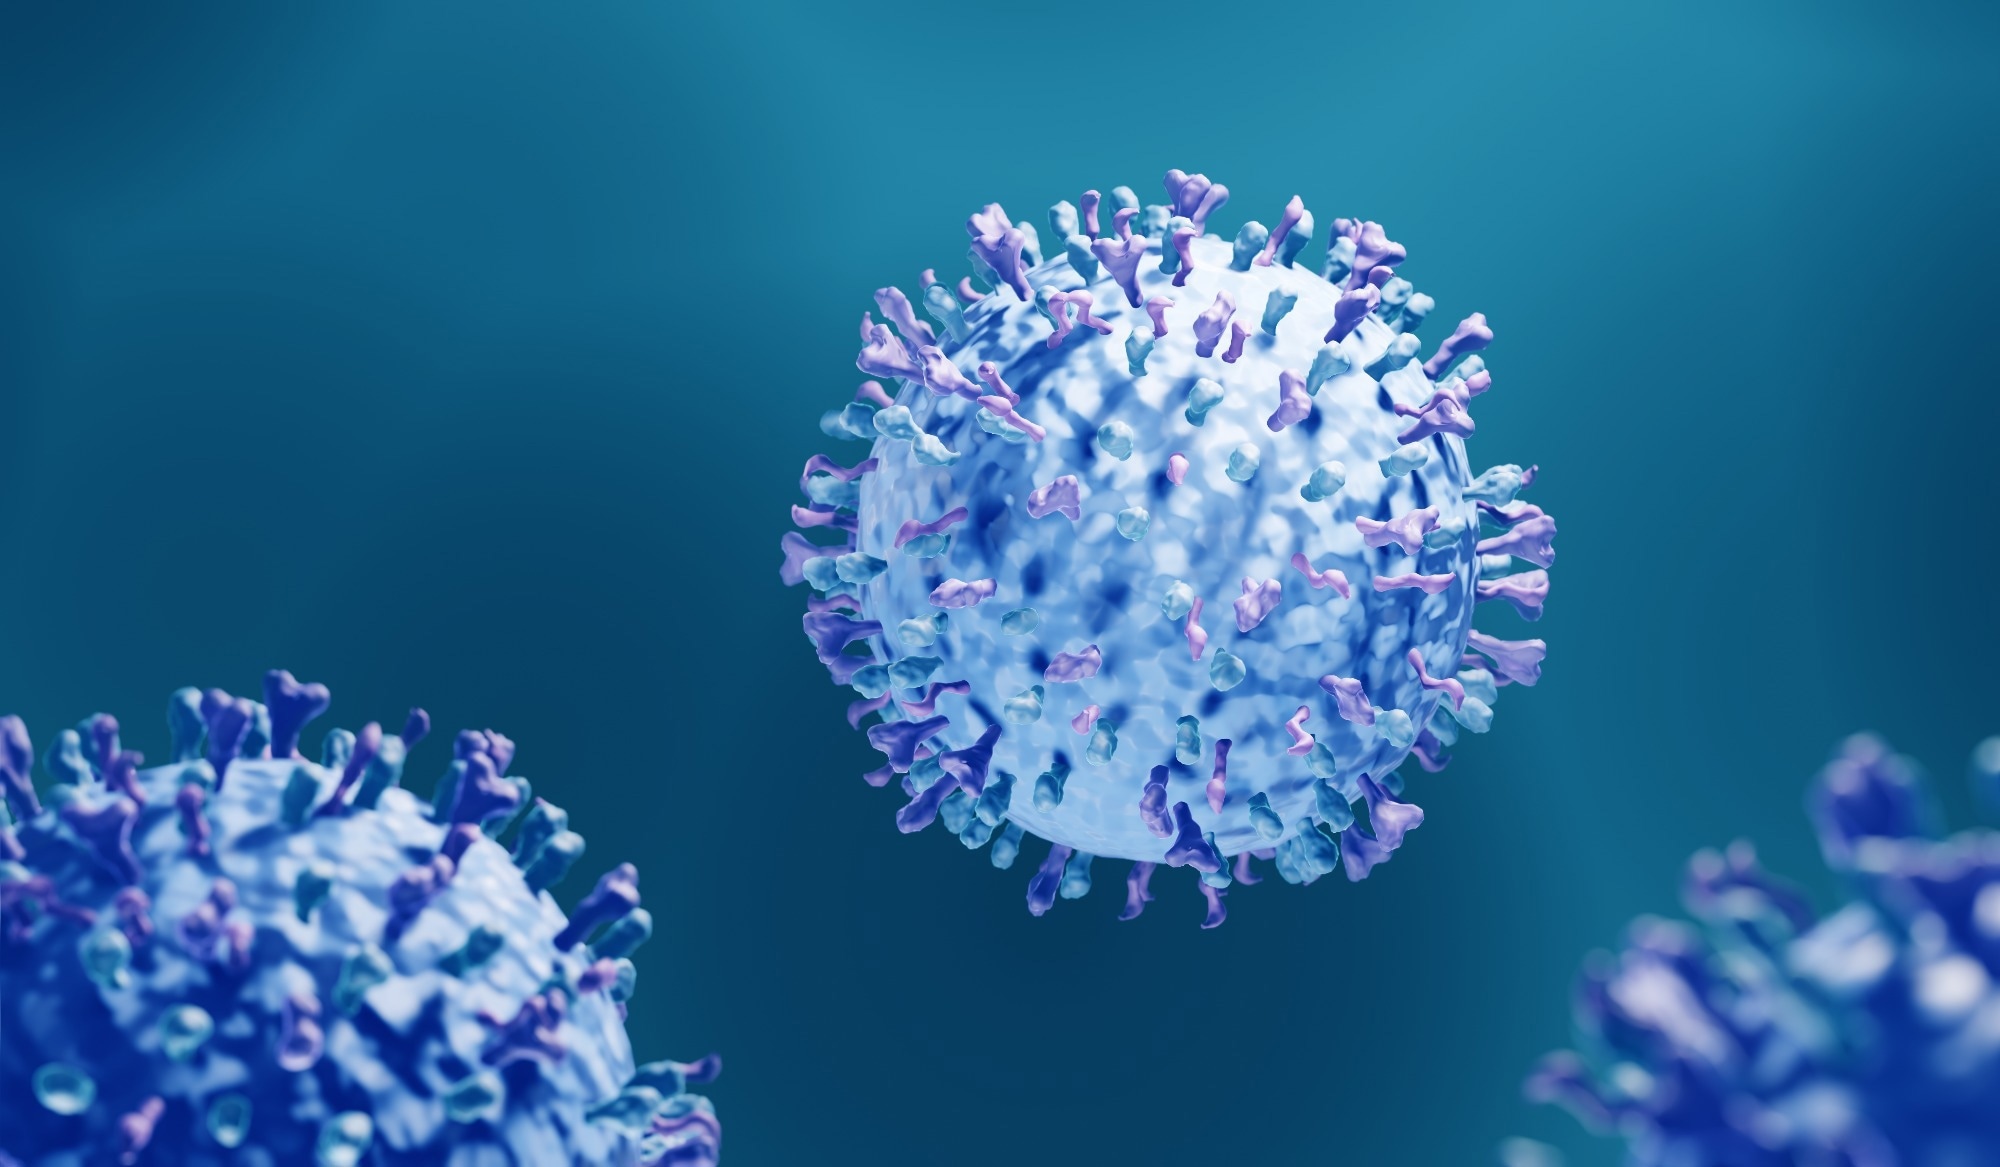 Study: Decreased Viral Load, Symptom Reduction, and Prevention of Respiratory Syncytial Virus Infection with MVA-BN-RSV Vaccine. Image Credit: ART-ur/Shutterstock